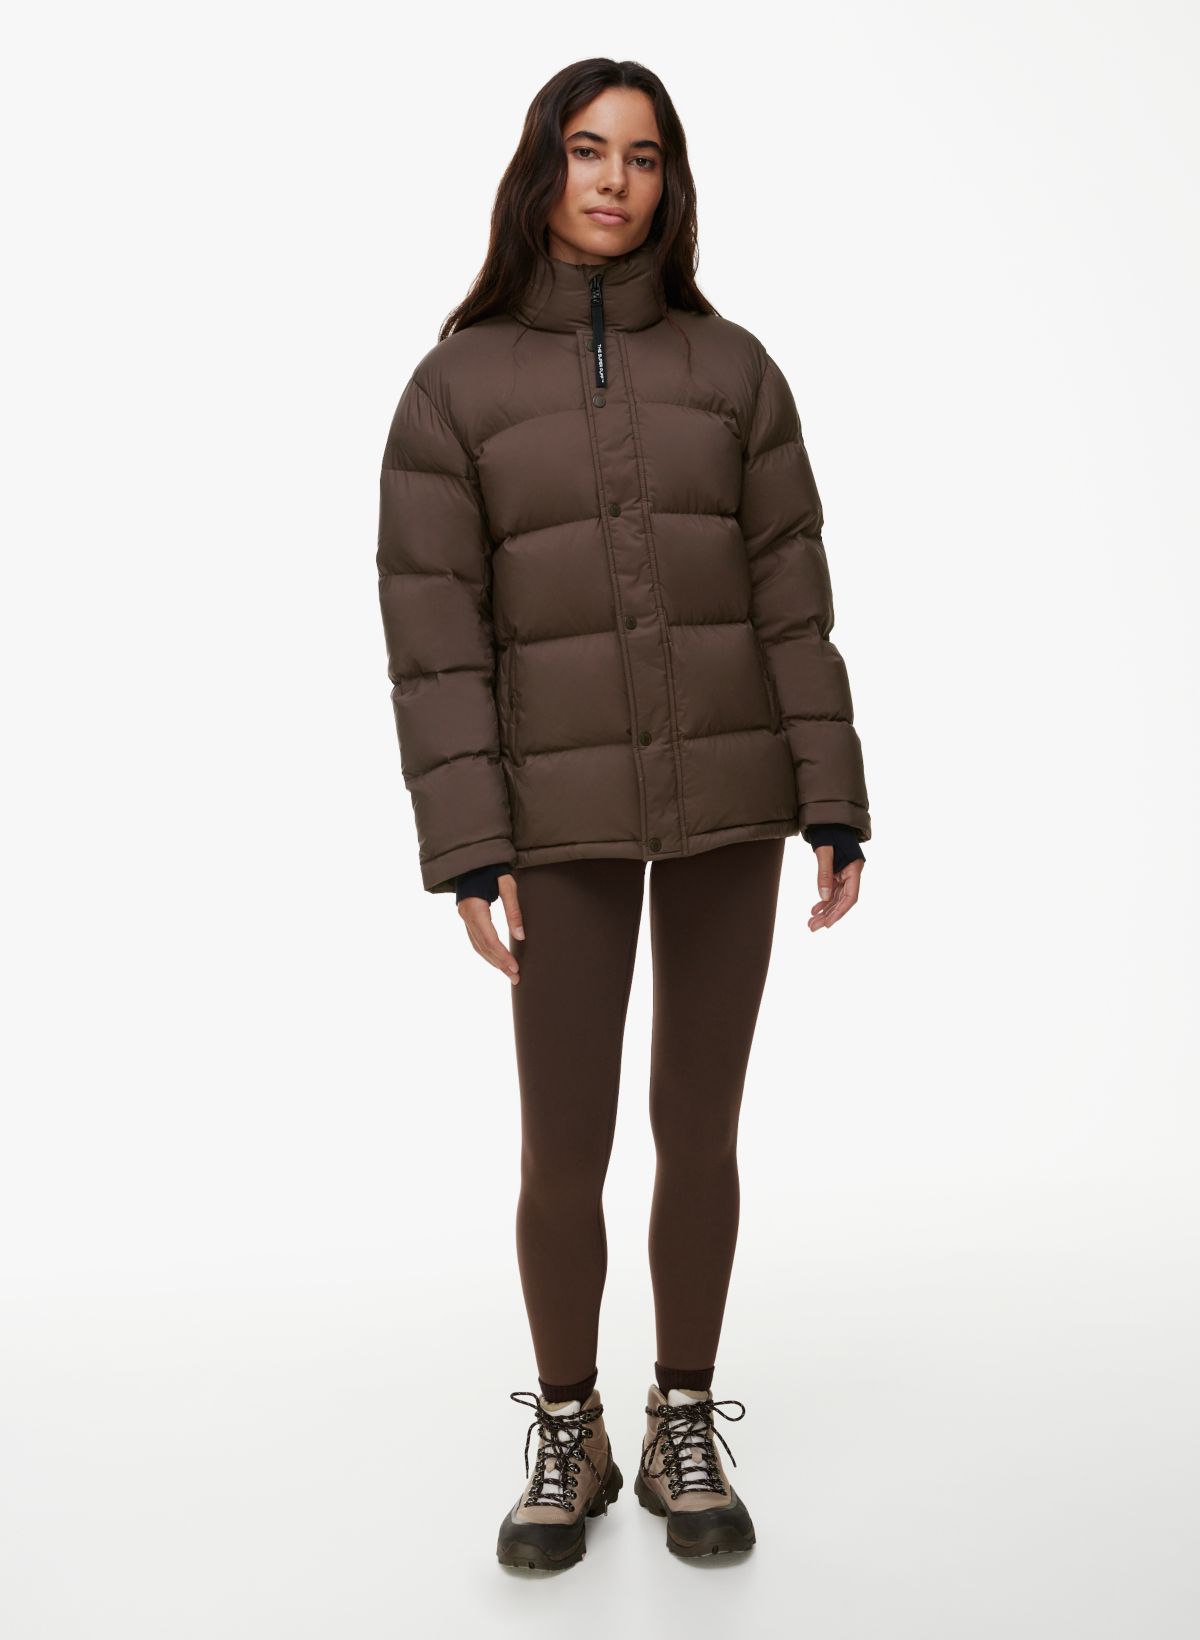 Lots of new Super Puff styles just added : r/Aritzia